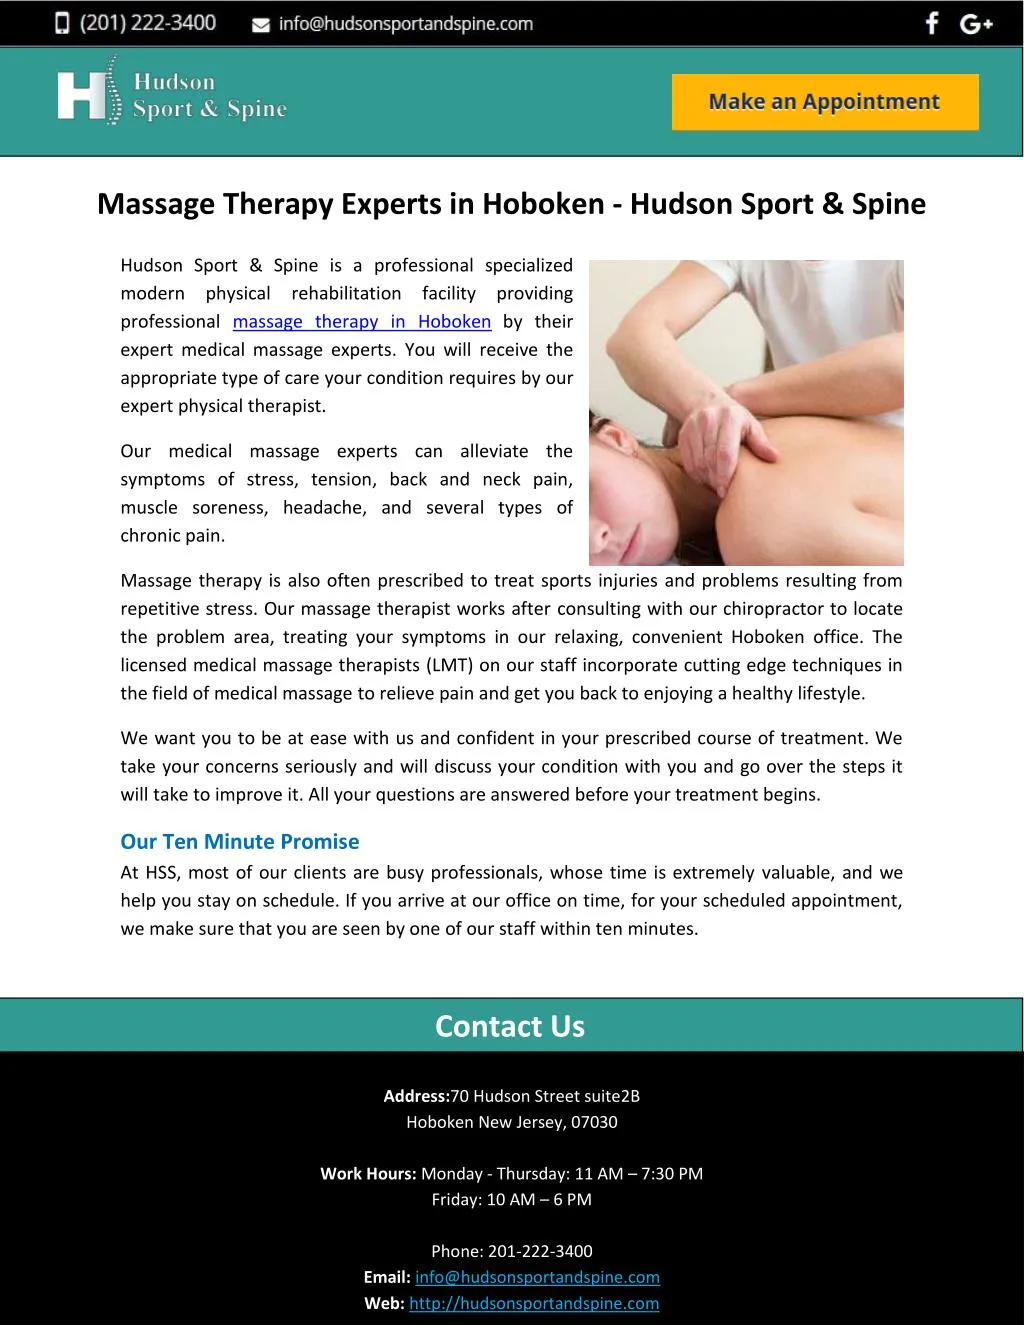 massage therapy experts in hoboken hudson sport